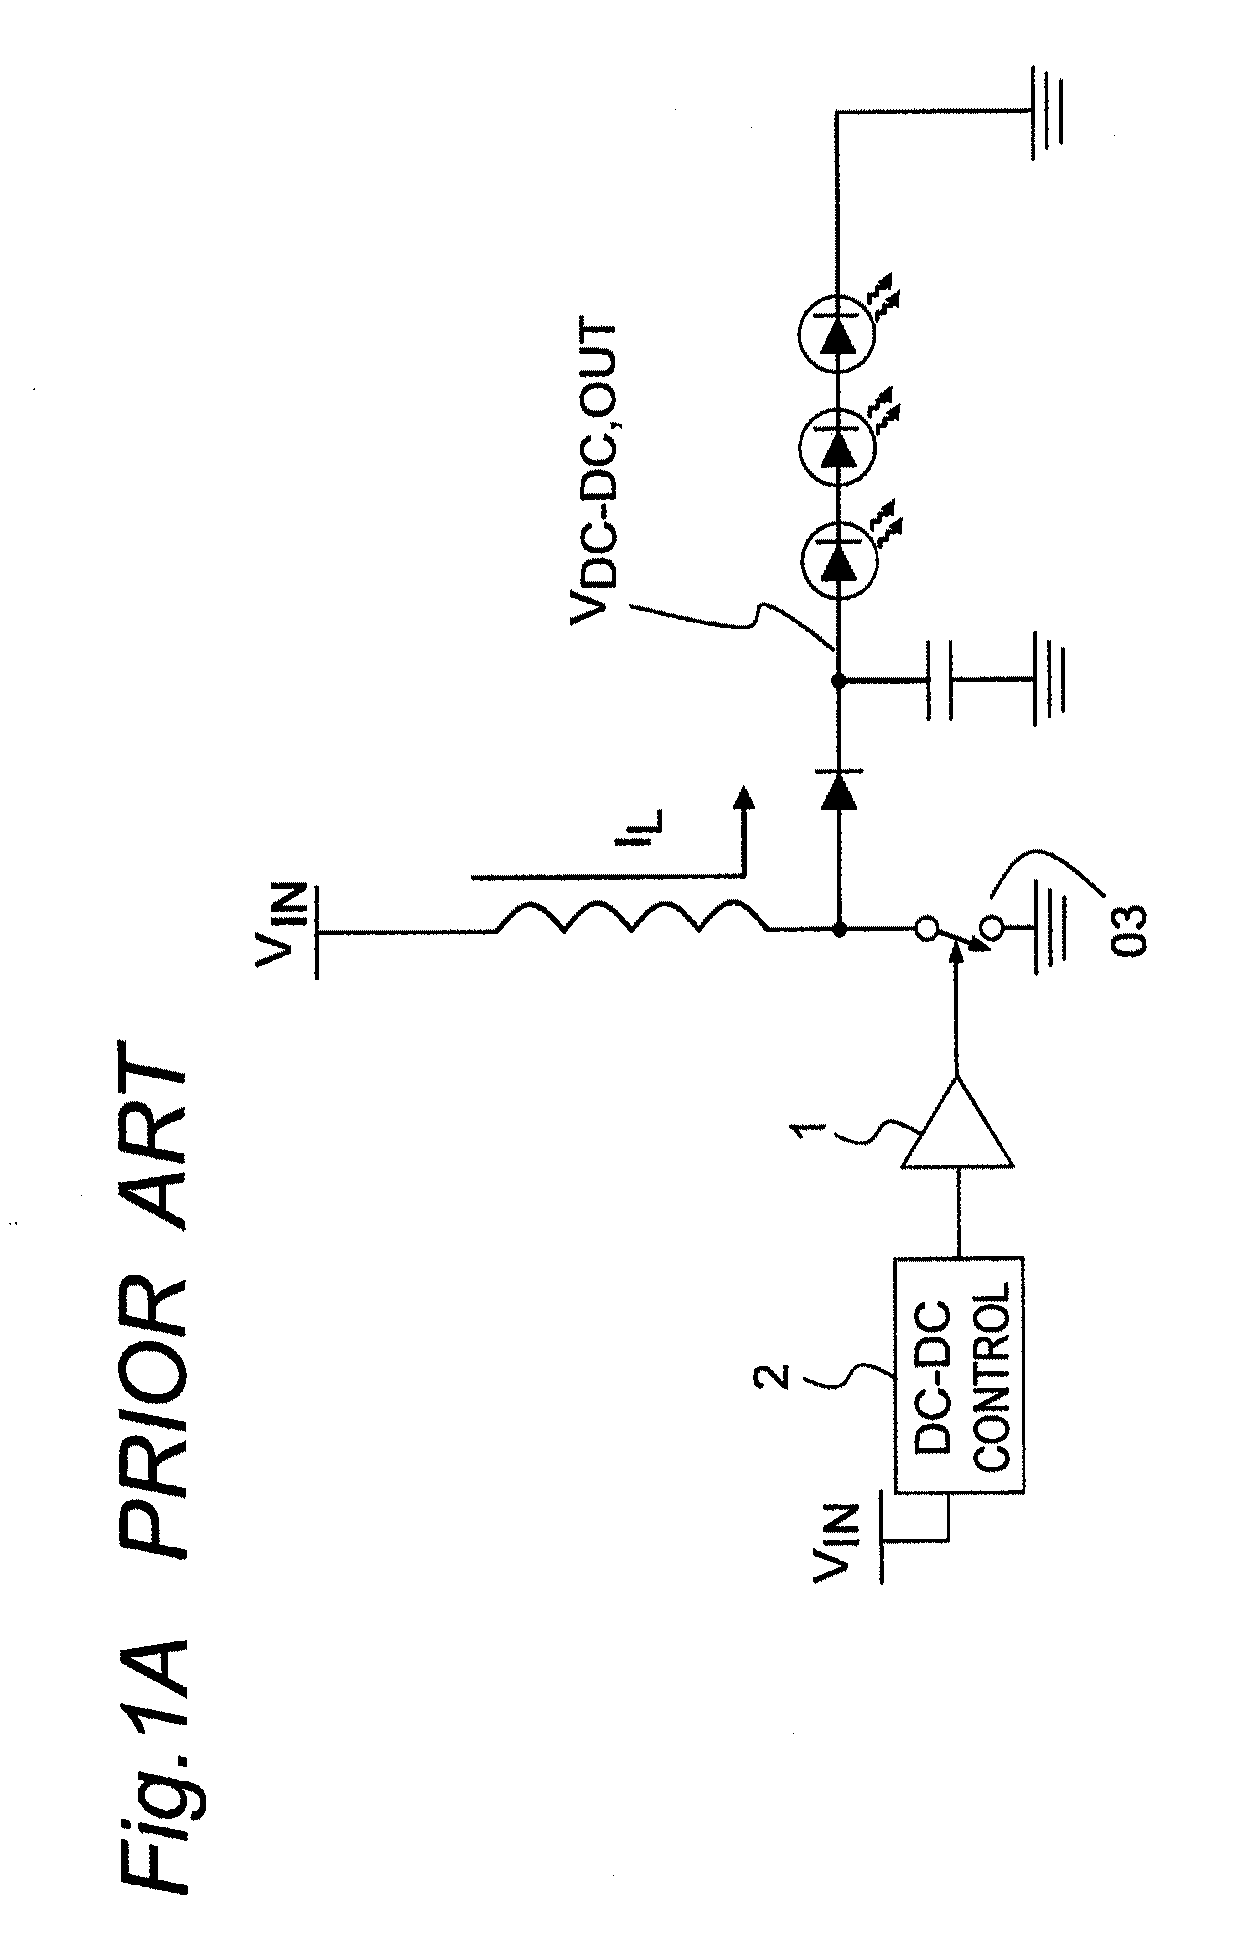 On-off timer circuit for use in dc-dc converter